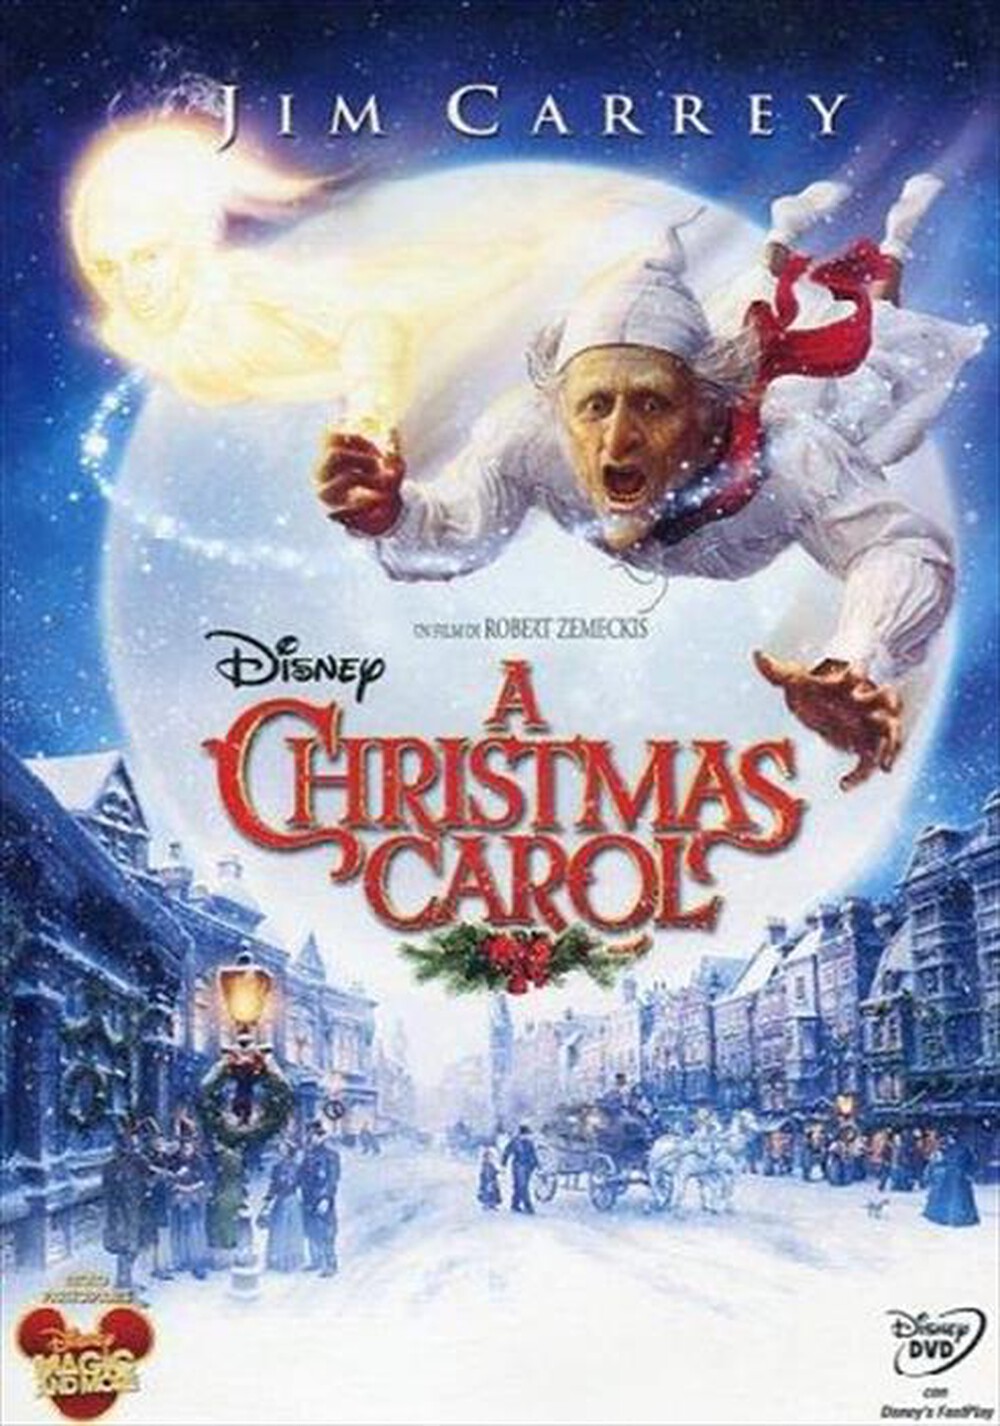 "EAGLE PICTURES - Christmas Carol (A) (2009)"